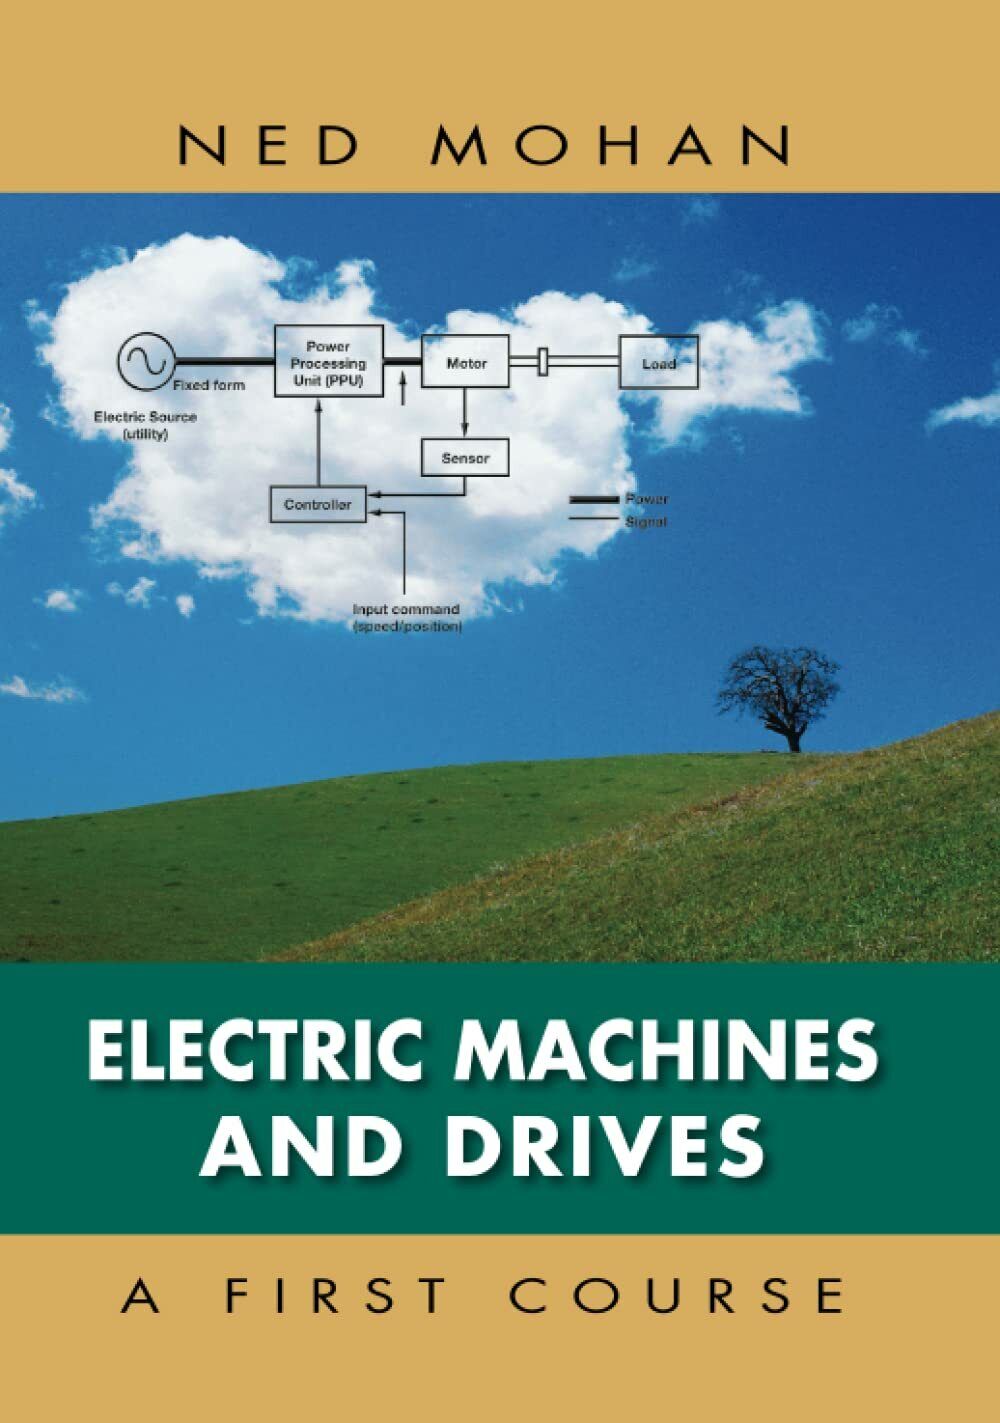 Electric Machines and Drives: A First Course - Ned Mohan - WILEY, 2011 libro usato